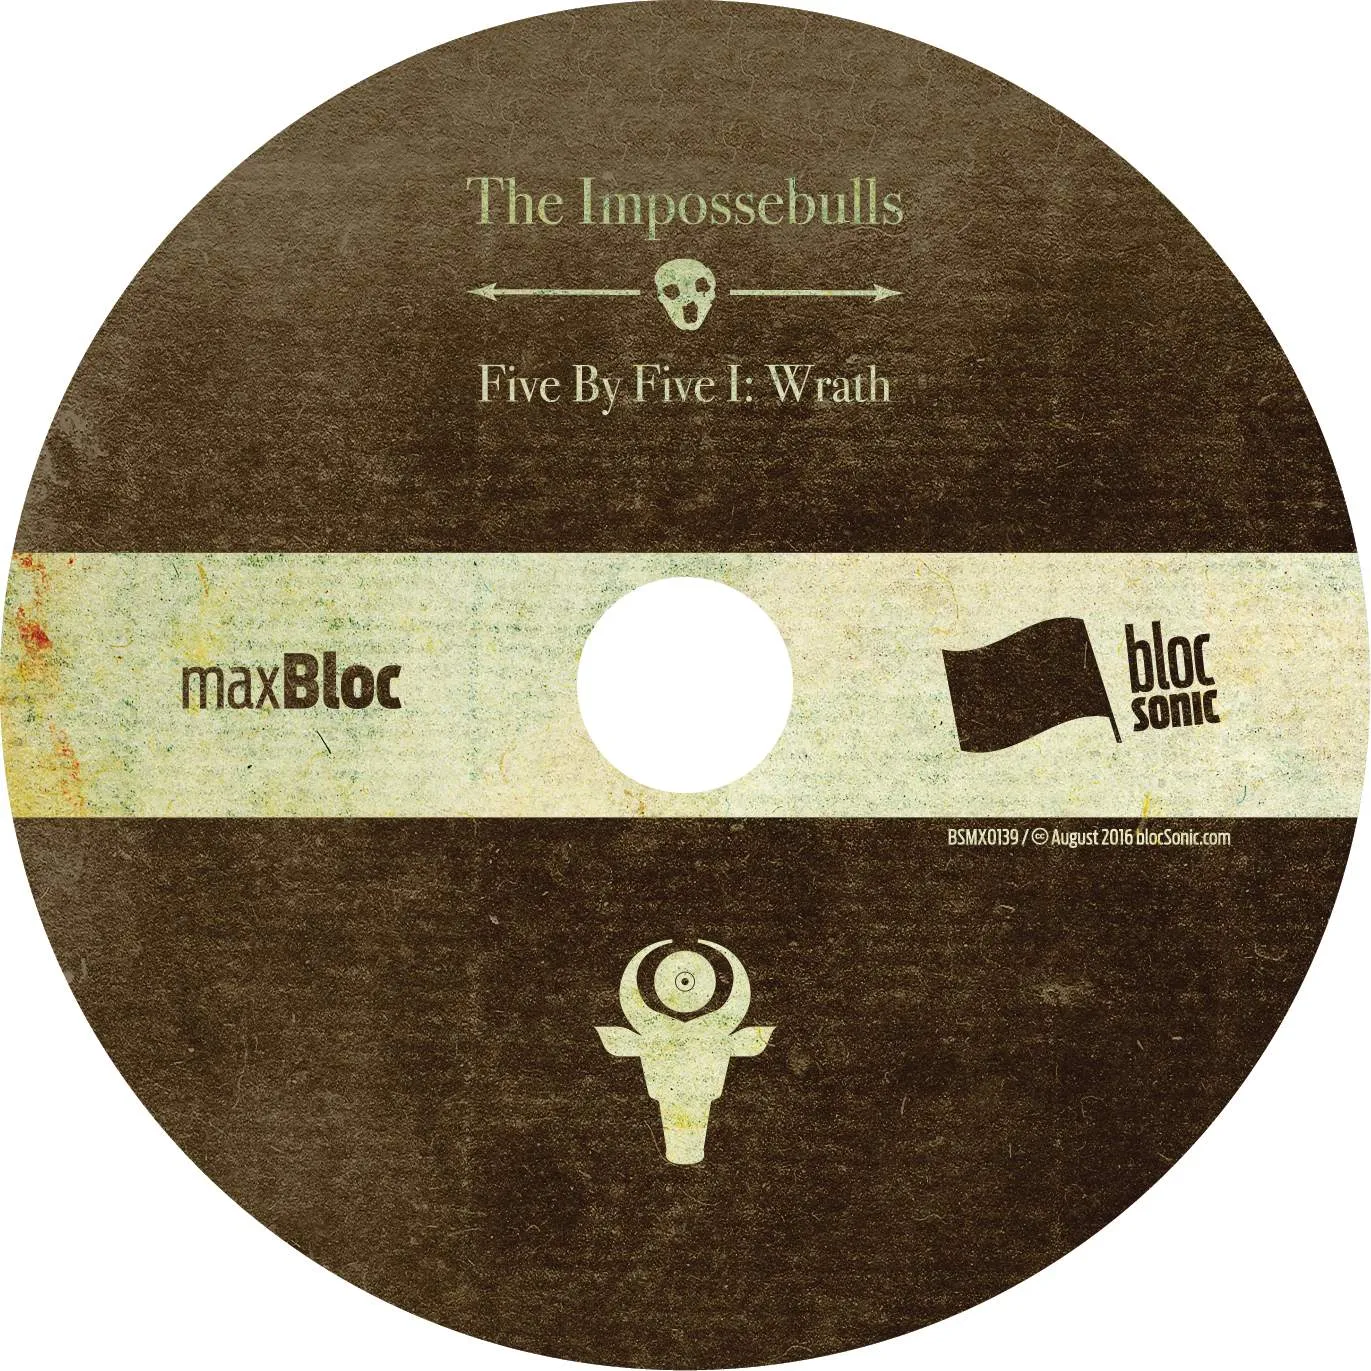 Album disc for “Five By Five I: Wrath” by The Impossebulls